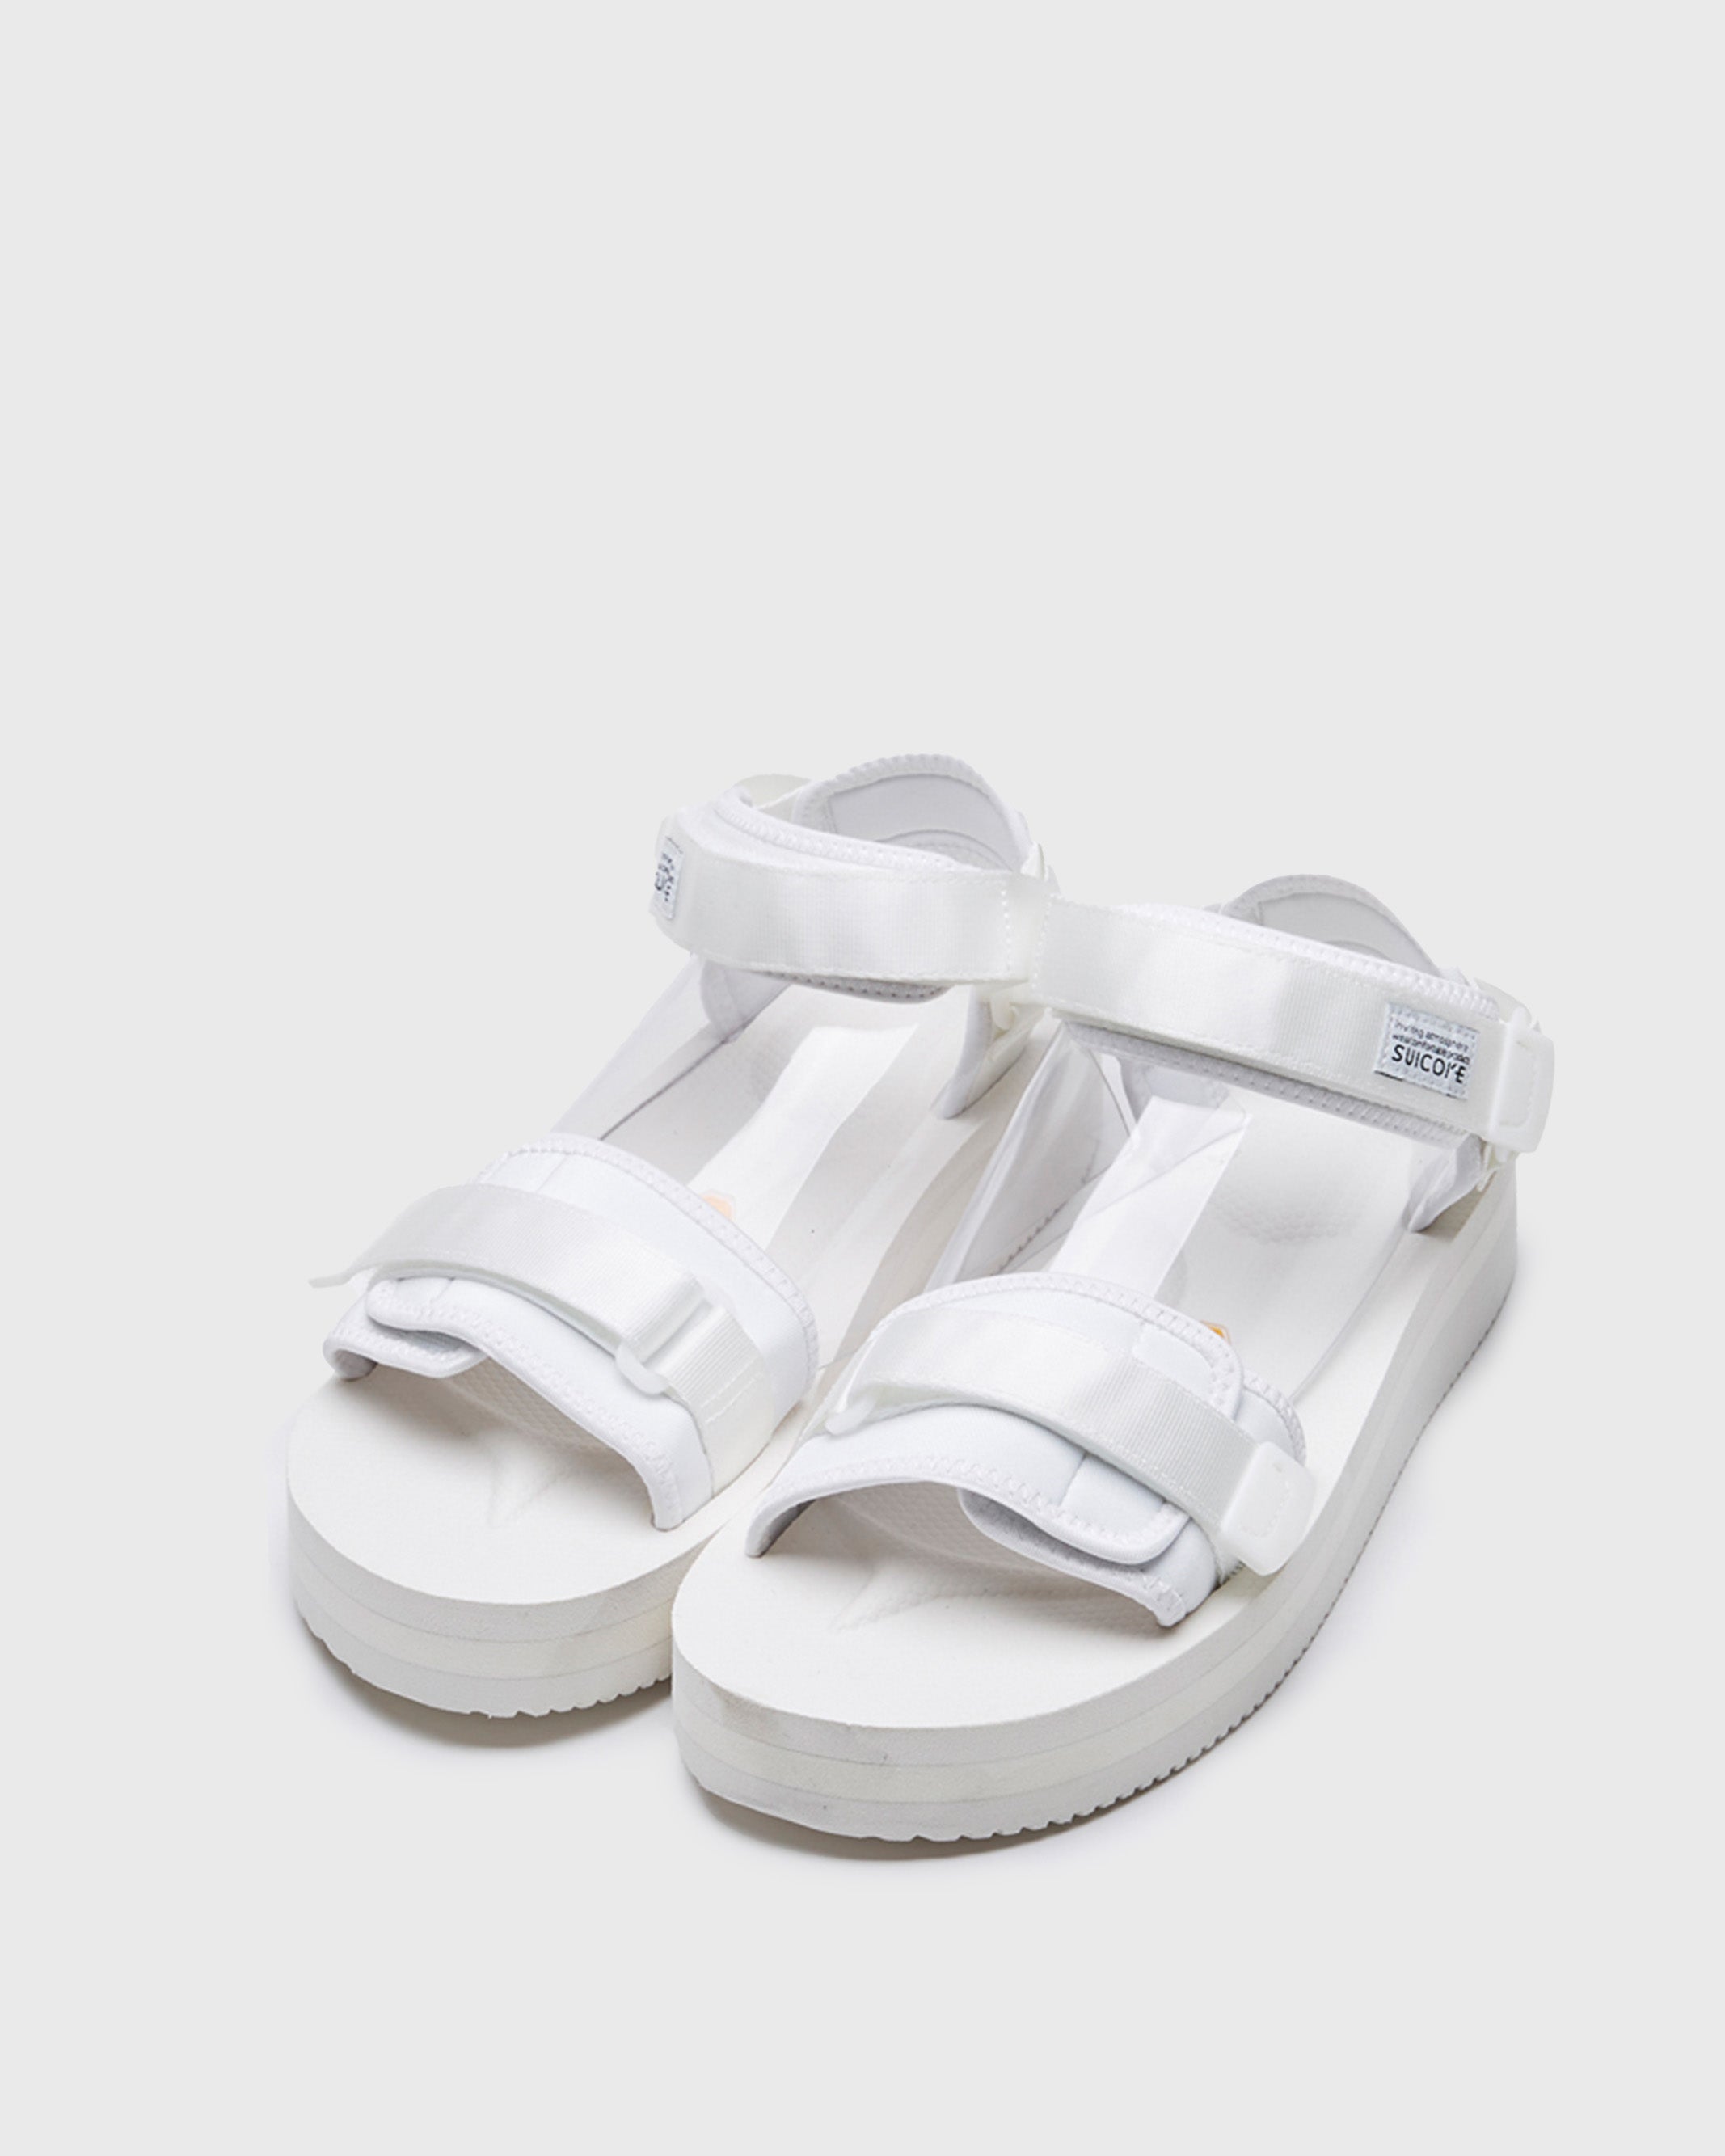 SUICOKE CEL-VPO in White OG-064VPO | Shop from eightywingold an official brand partner for SUICOKE Canada and US.